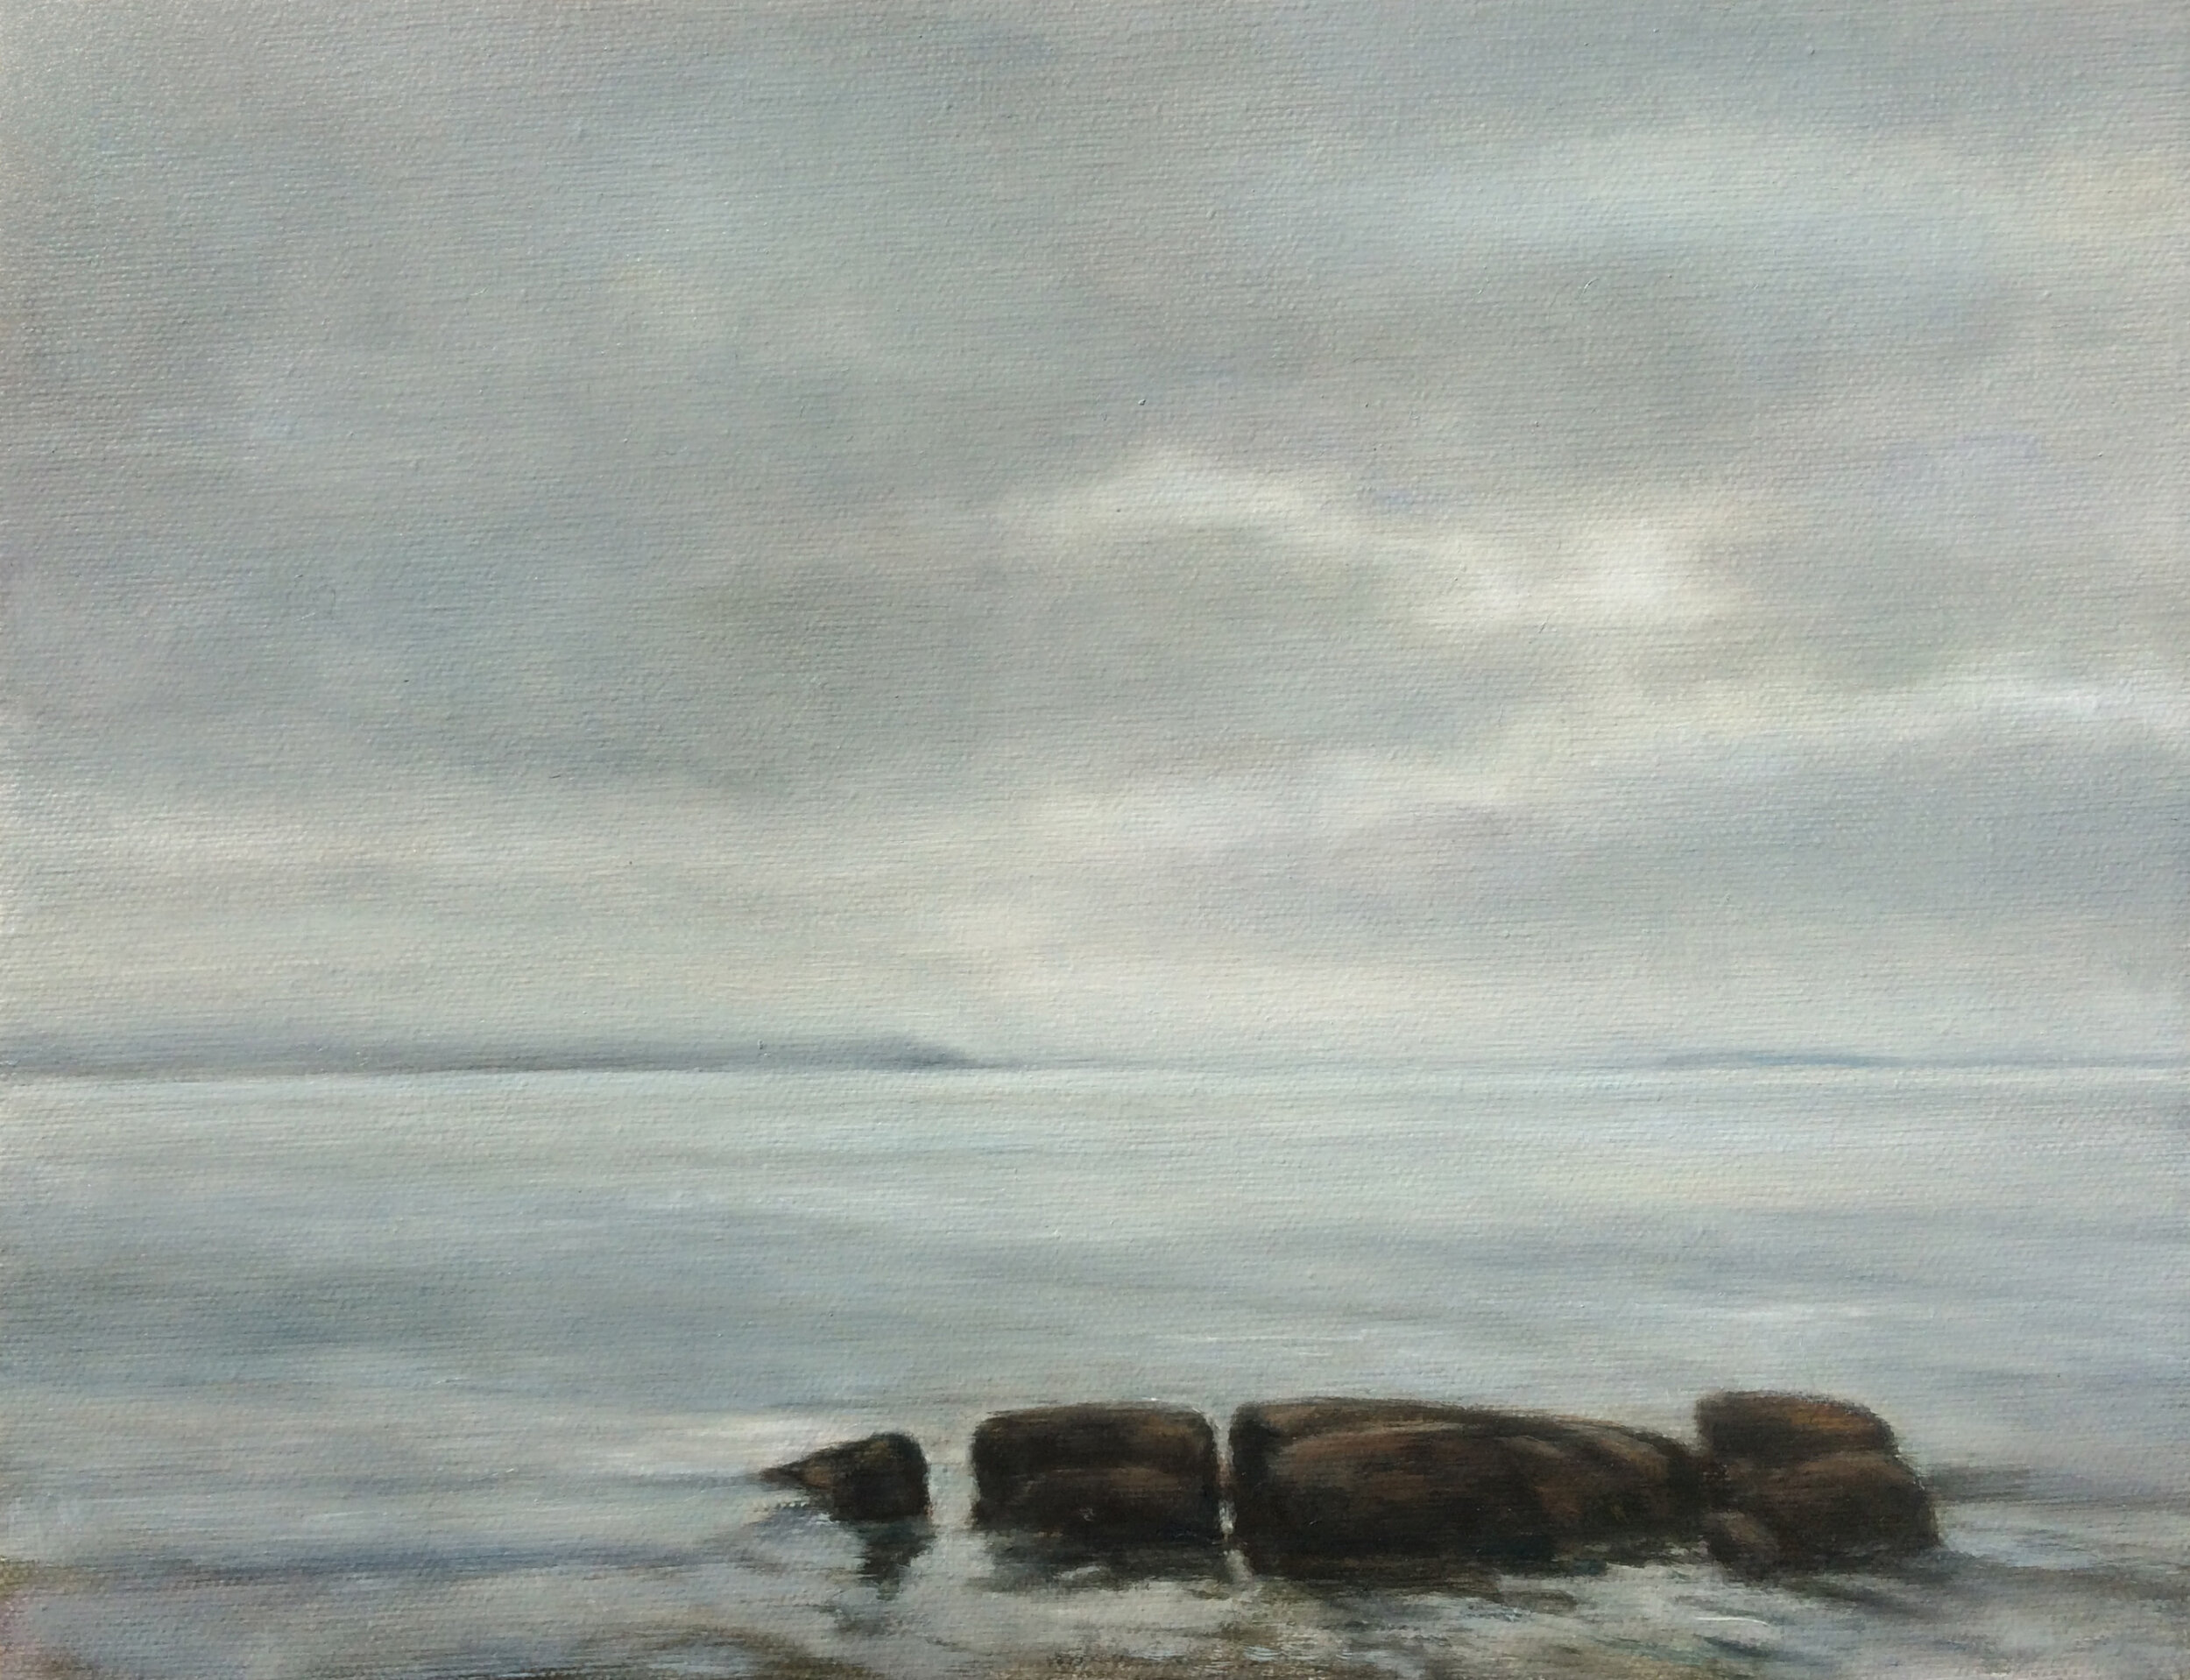  Mary Lou Schempf  Maine Fog,  9” x 12”,  oil on canvas  (private collection)  